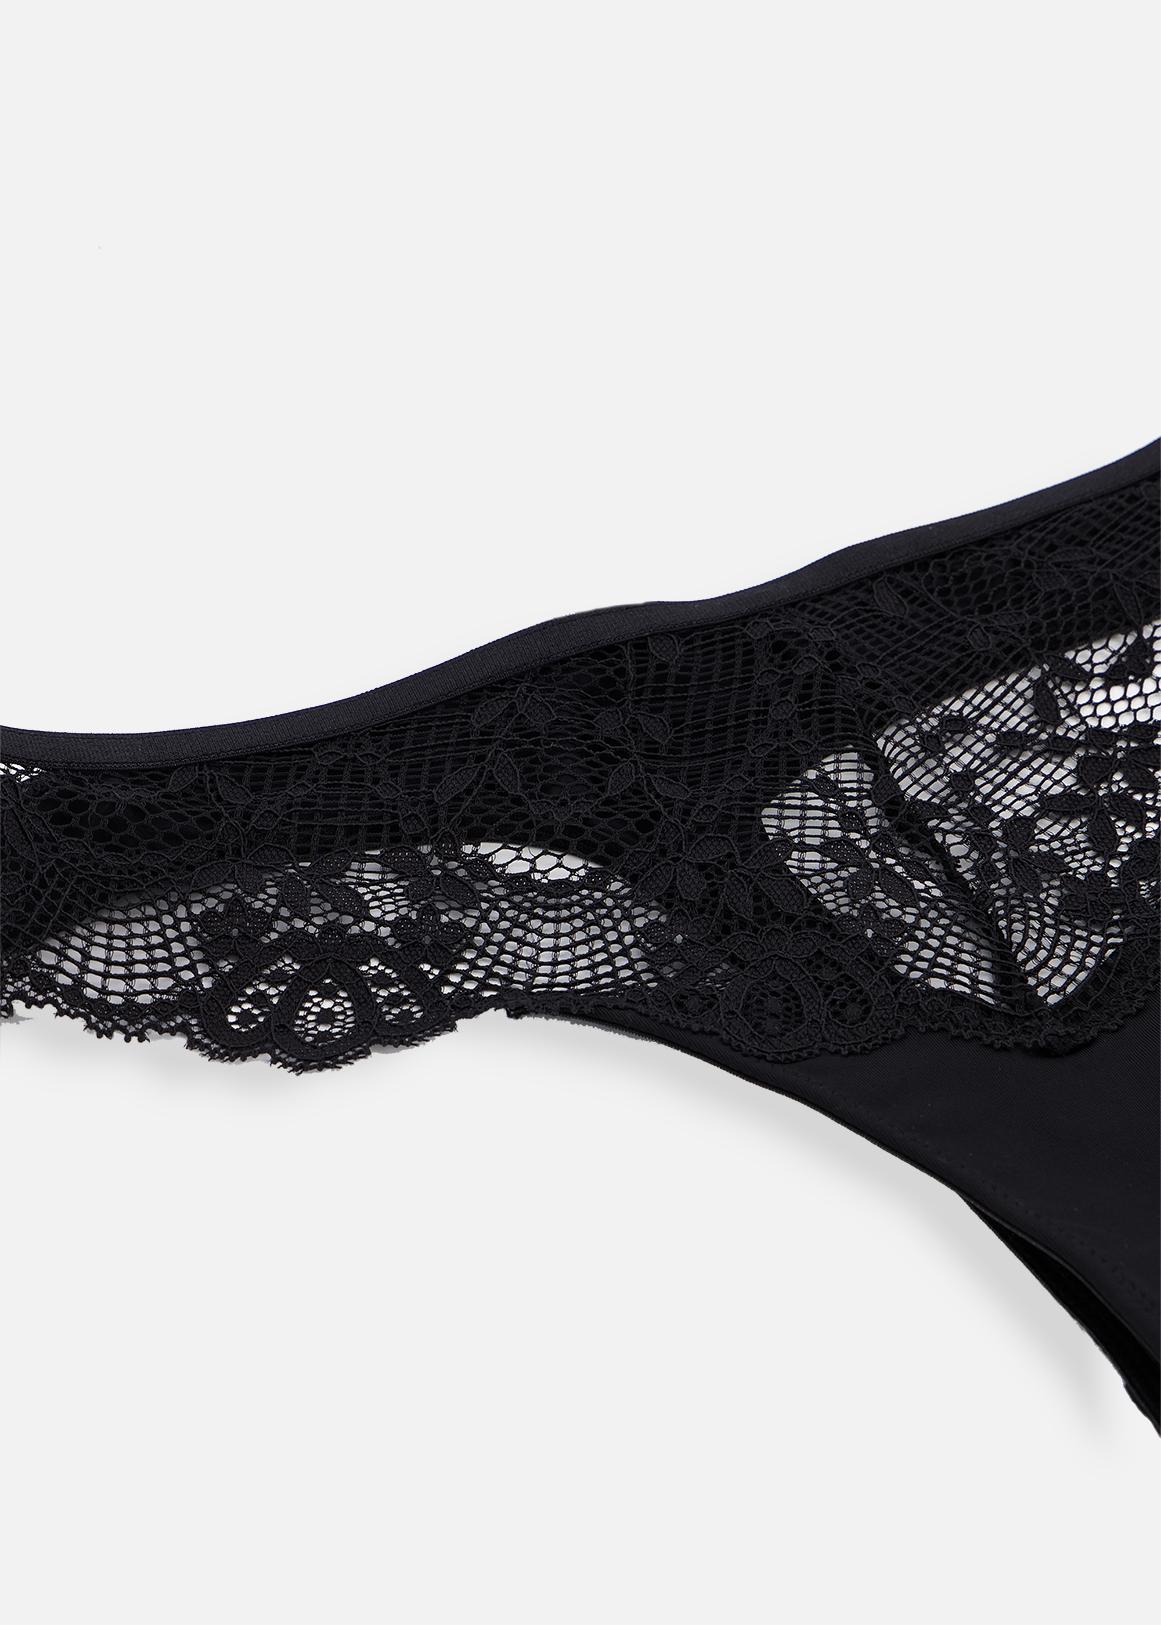 MyRunway  Shop Woolworths Black Sheer Lace G-string for Women from